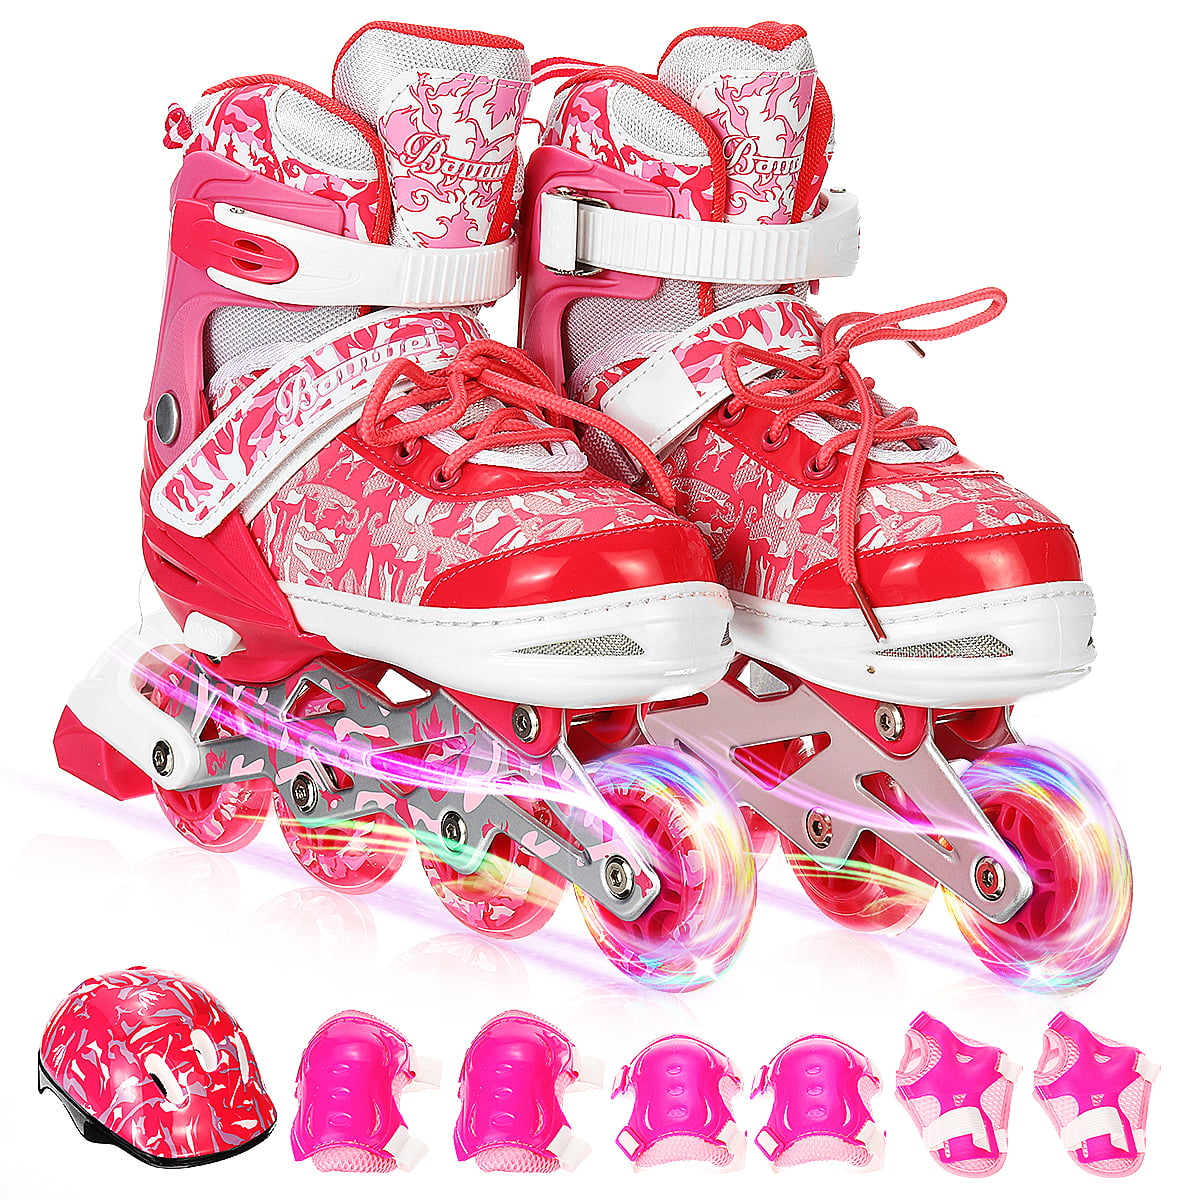 Pink Girls Inline Skates 4 Size Adjustable with Full Light Up Wheels,Fun Illuminating Roller Skates Blading for Kids and Youth,Men and Women 